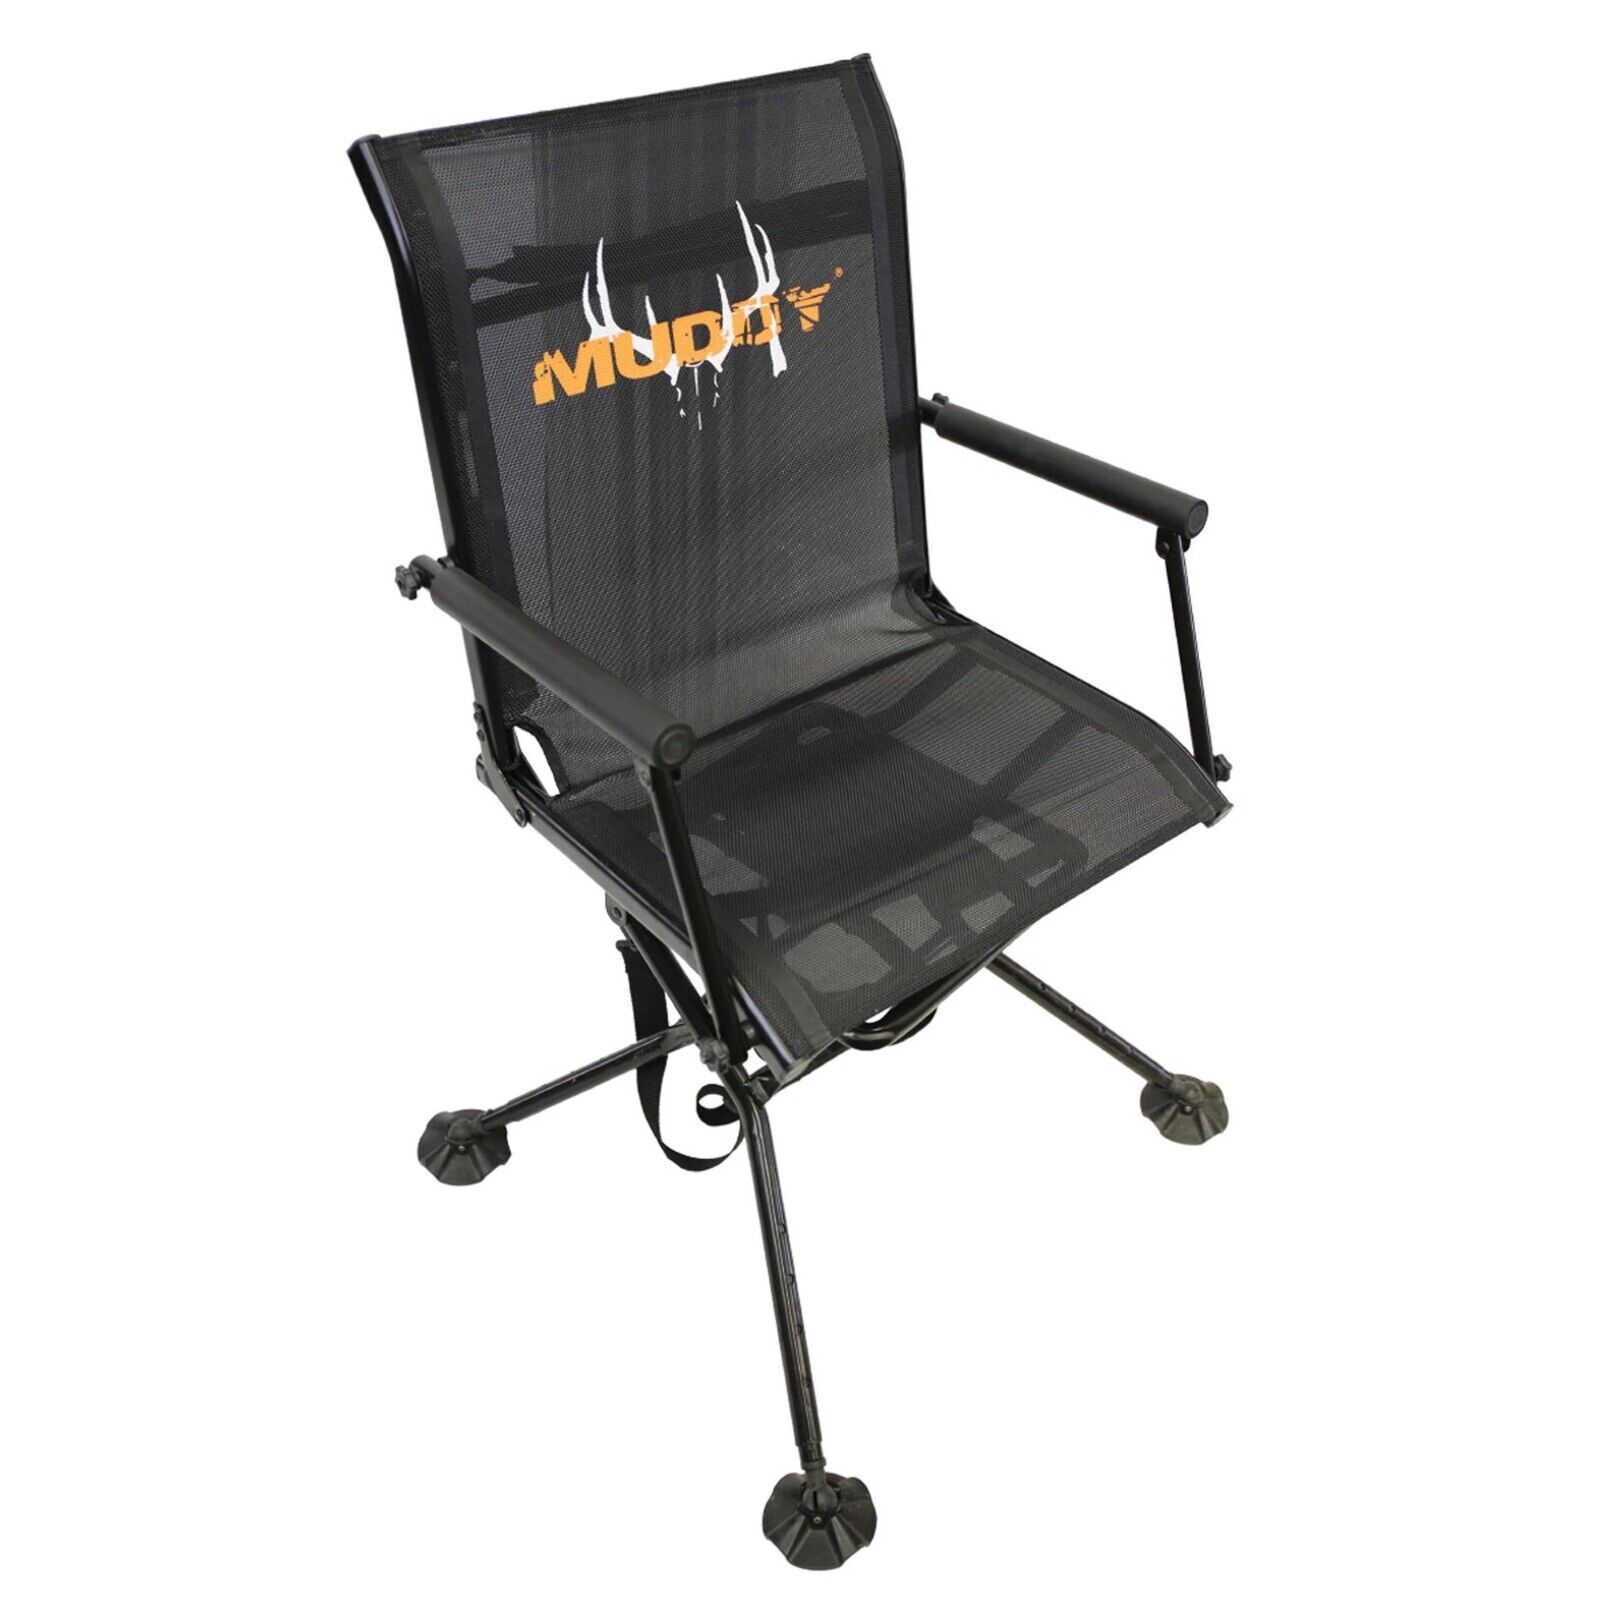 Hunting Ground Blind Chair 360 Degree Swivel With Adjustable Legs Steel Frame